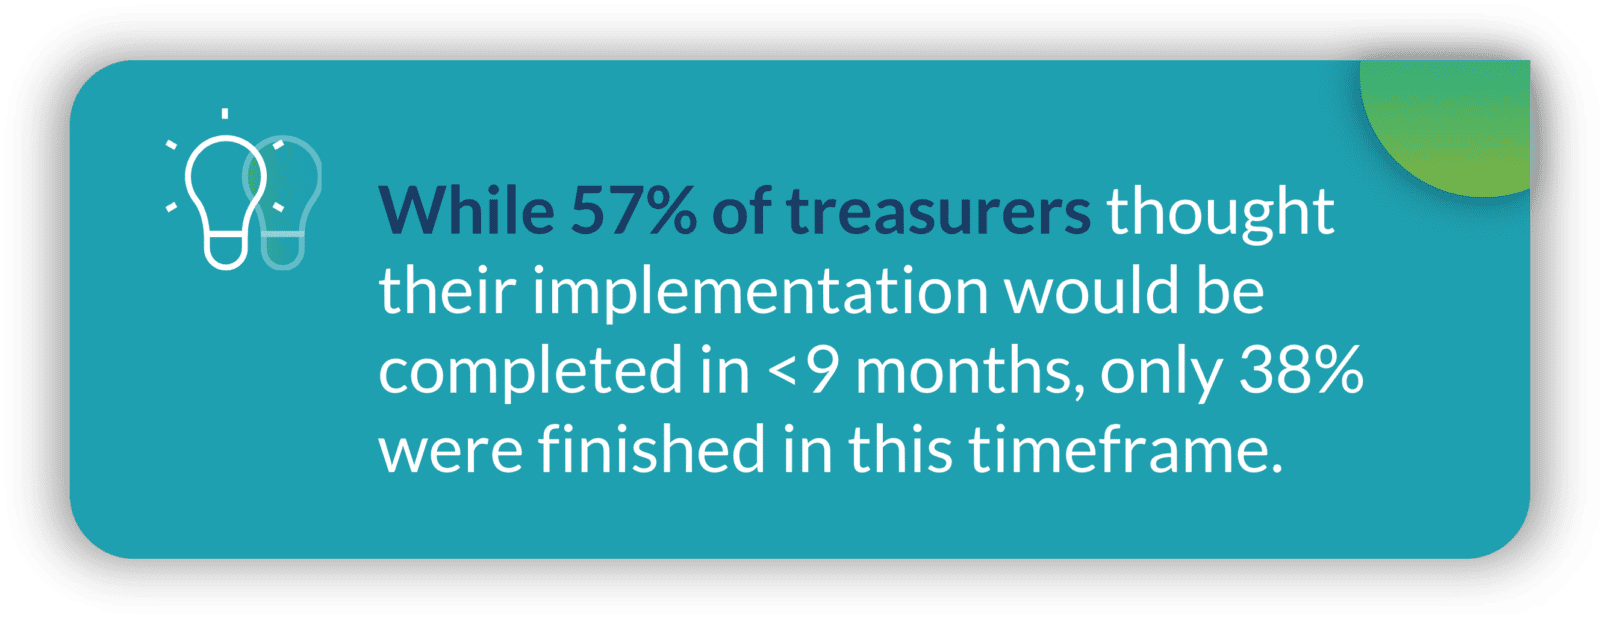 While 57% of treasurers thought their treasury tech implementation would be finished in under 9 months, only 38% were completed in this timeframe.